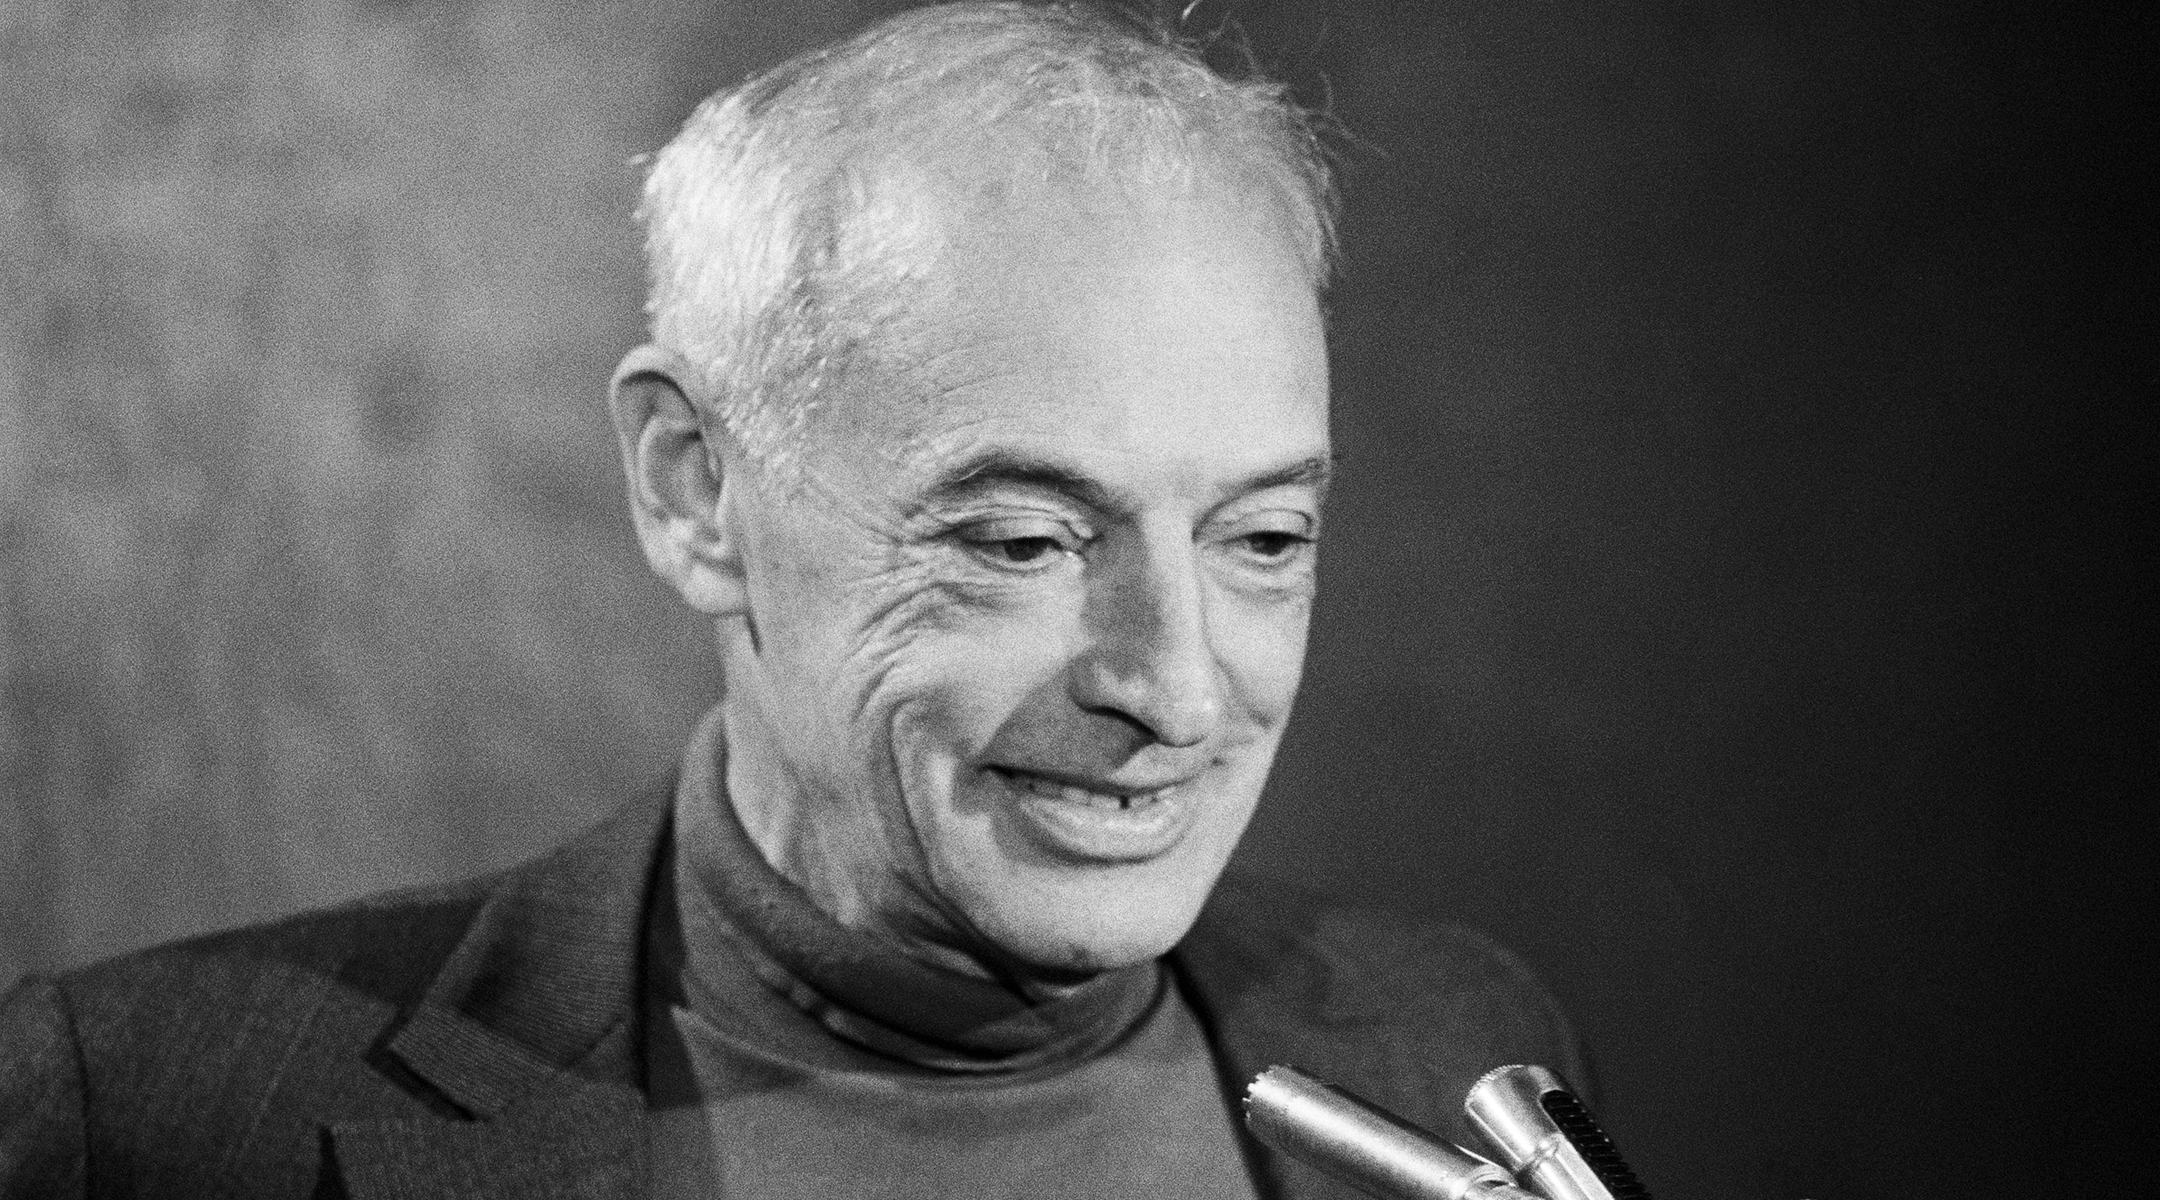 Saul Bellow talks to reporters about being awarded the 1976 Nobel Prize in Literature.